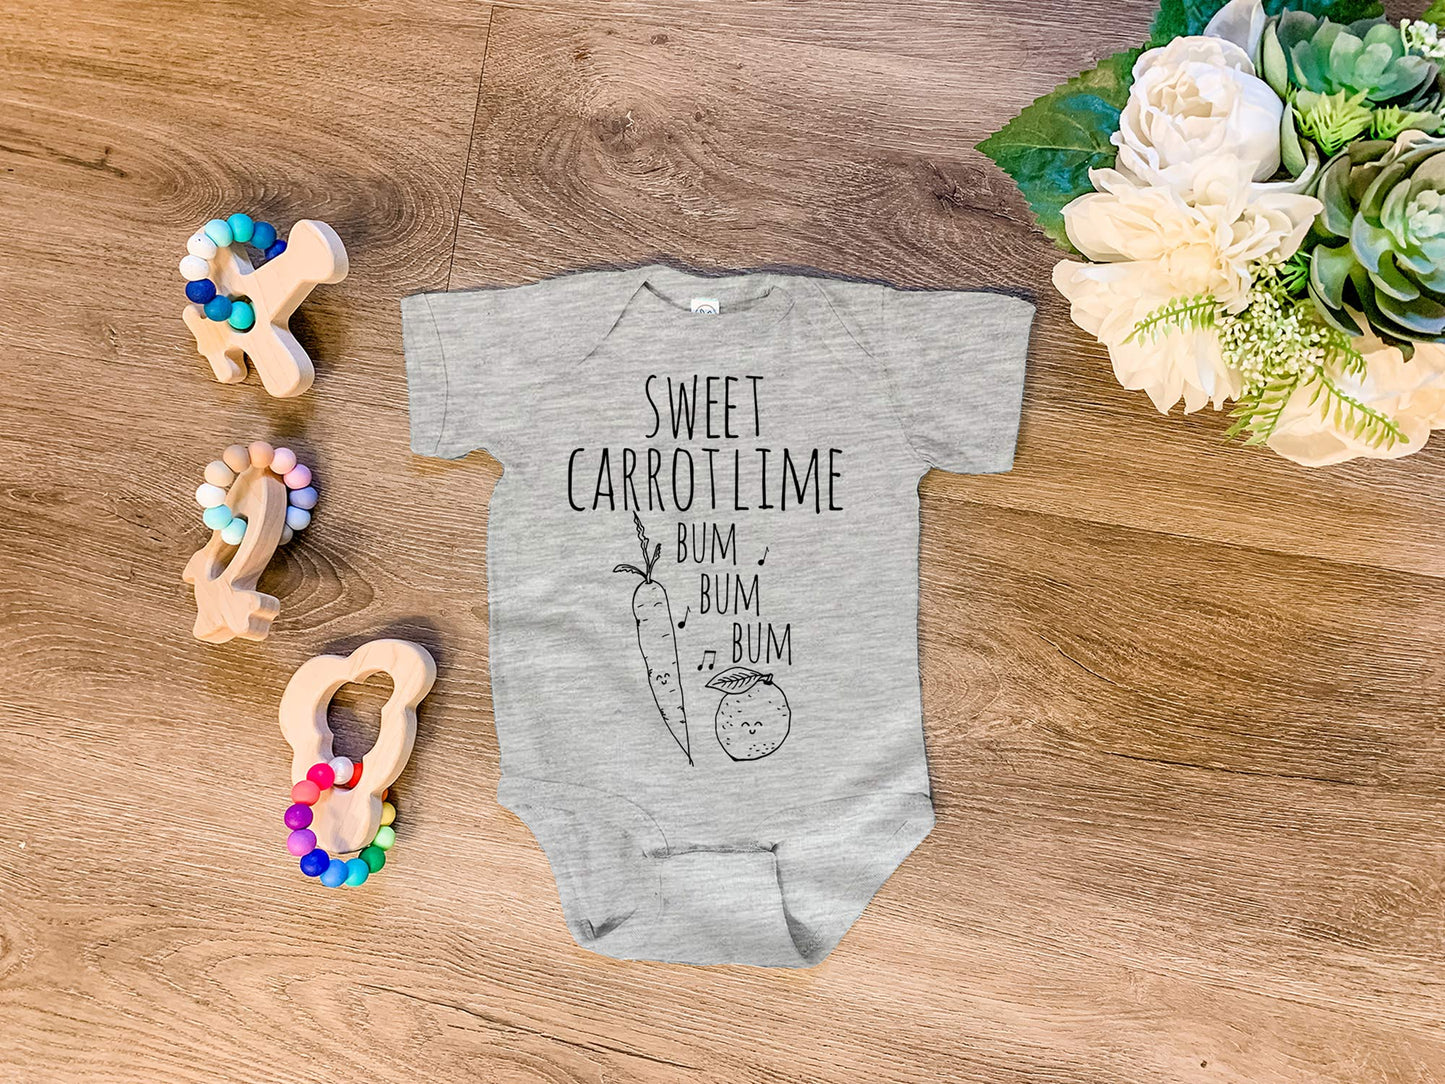 Sweet Carrot Lime Bum Bum Bum - Onesie - Heather Gray, Chill, or Lavender